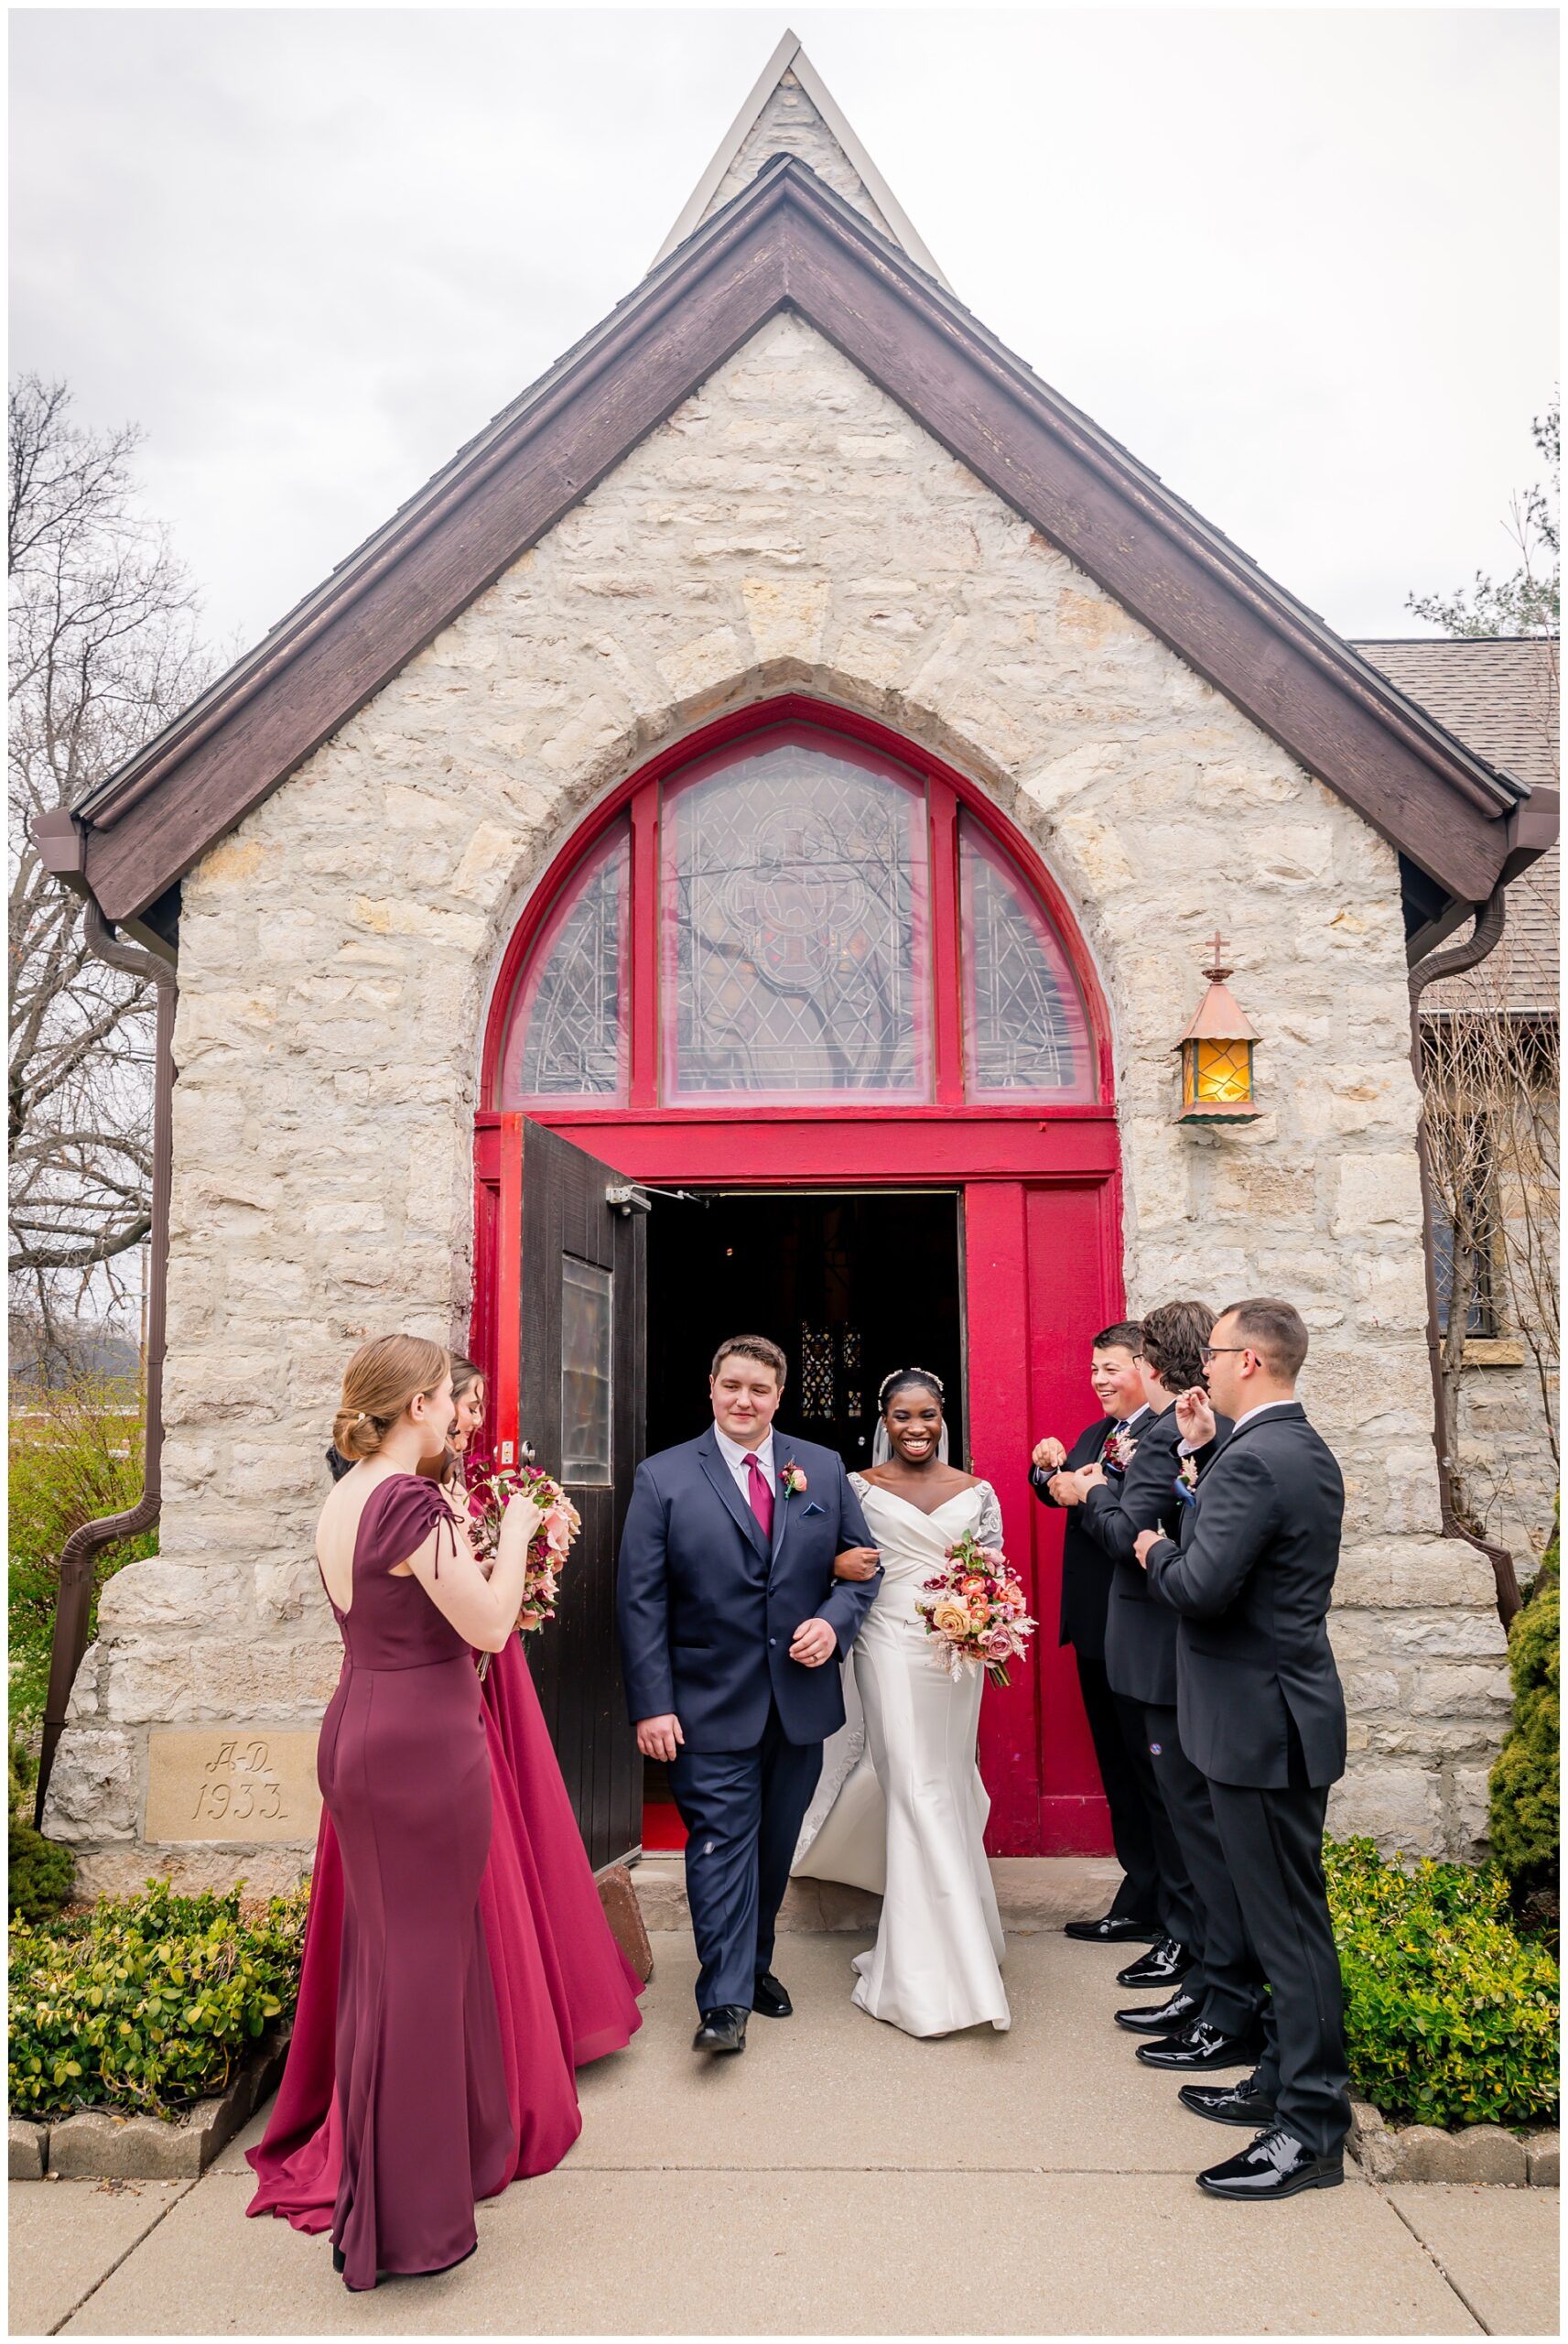 Wedding photography at St. Luke's Episcopal Church in Excelsior Springs, Missouri, by Kansas City wedding photographers Wisdom-Watson Weddings.